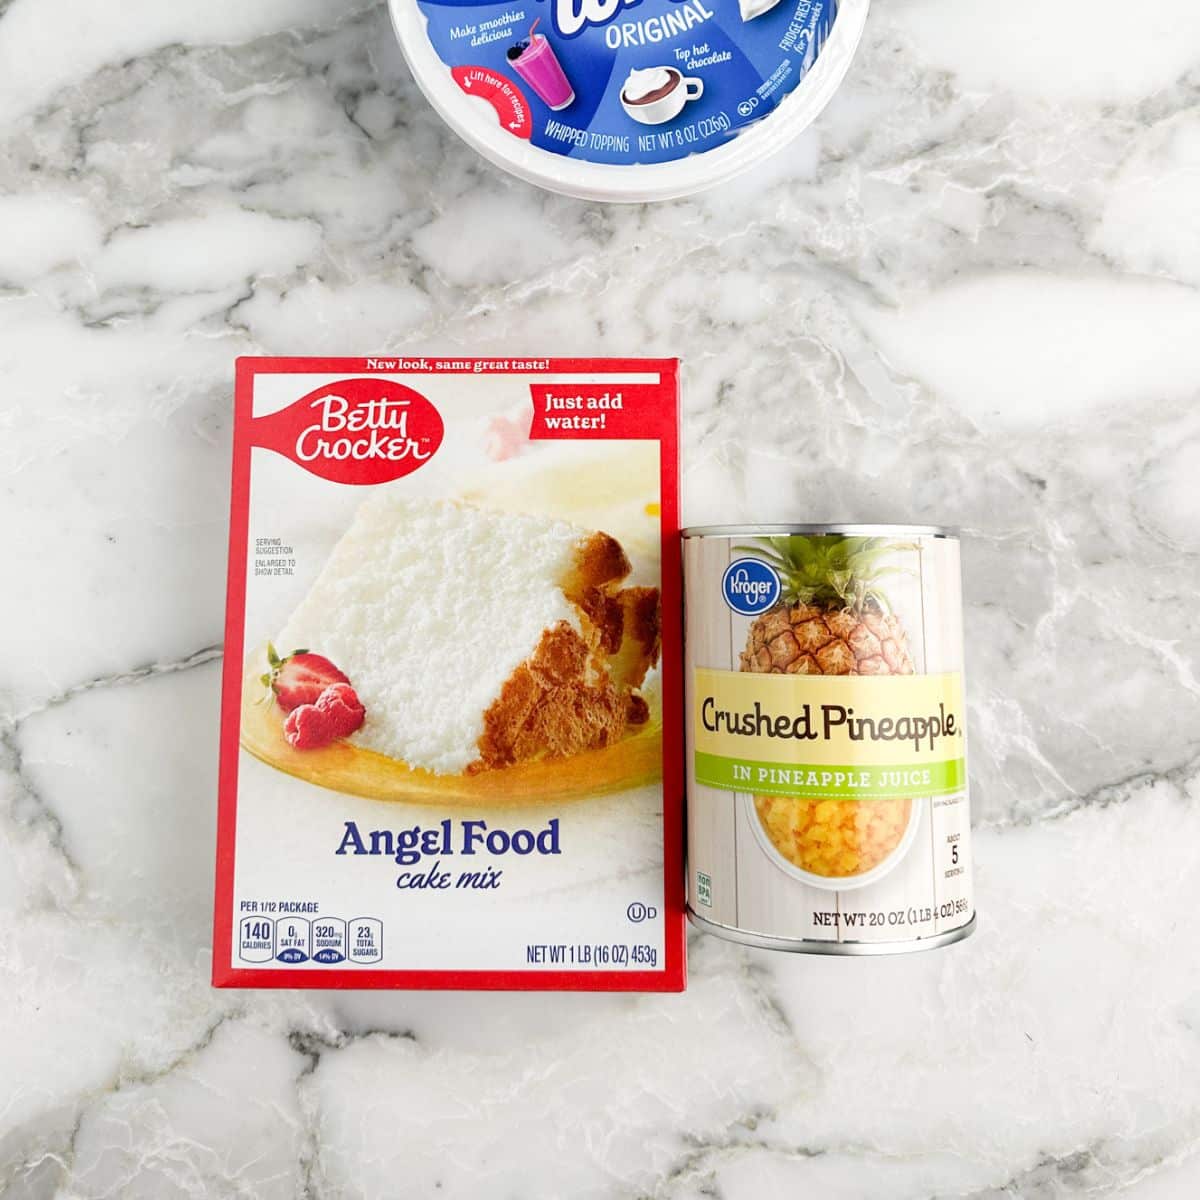 Box of angel food cake mix, can of crushed pineapple, and Cool Whip.